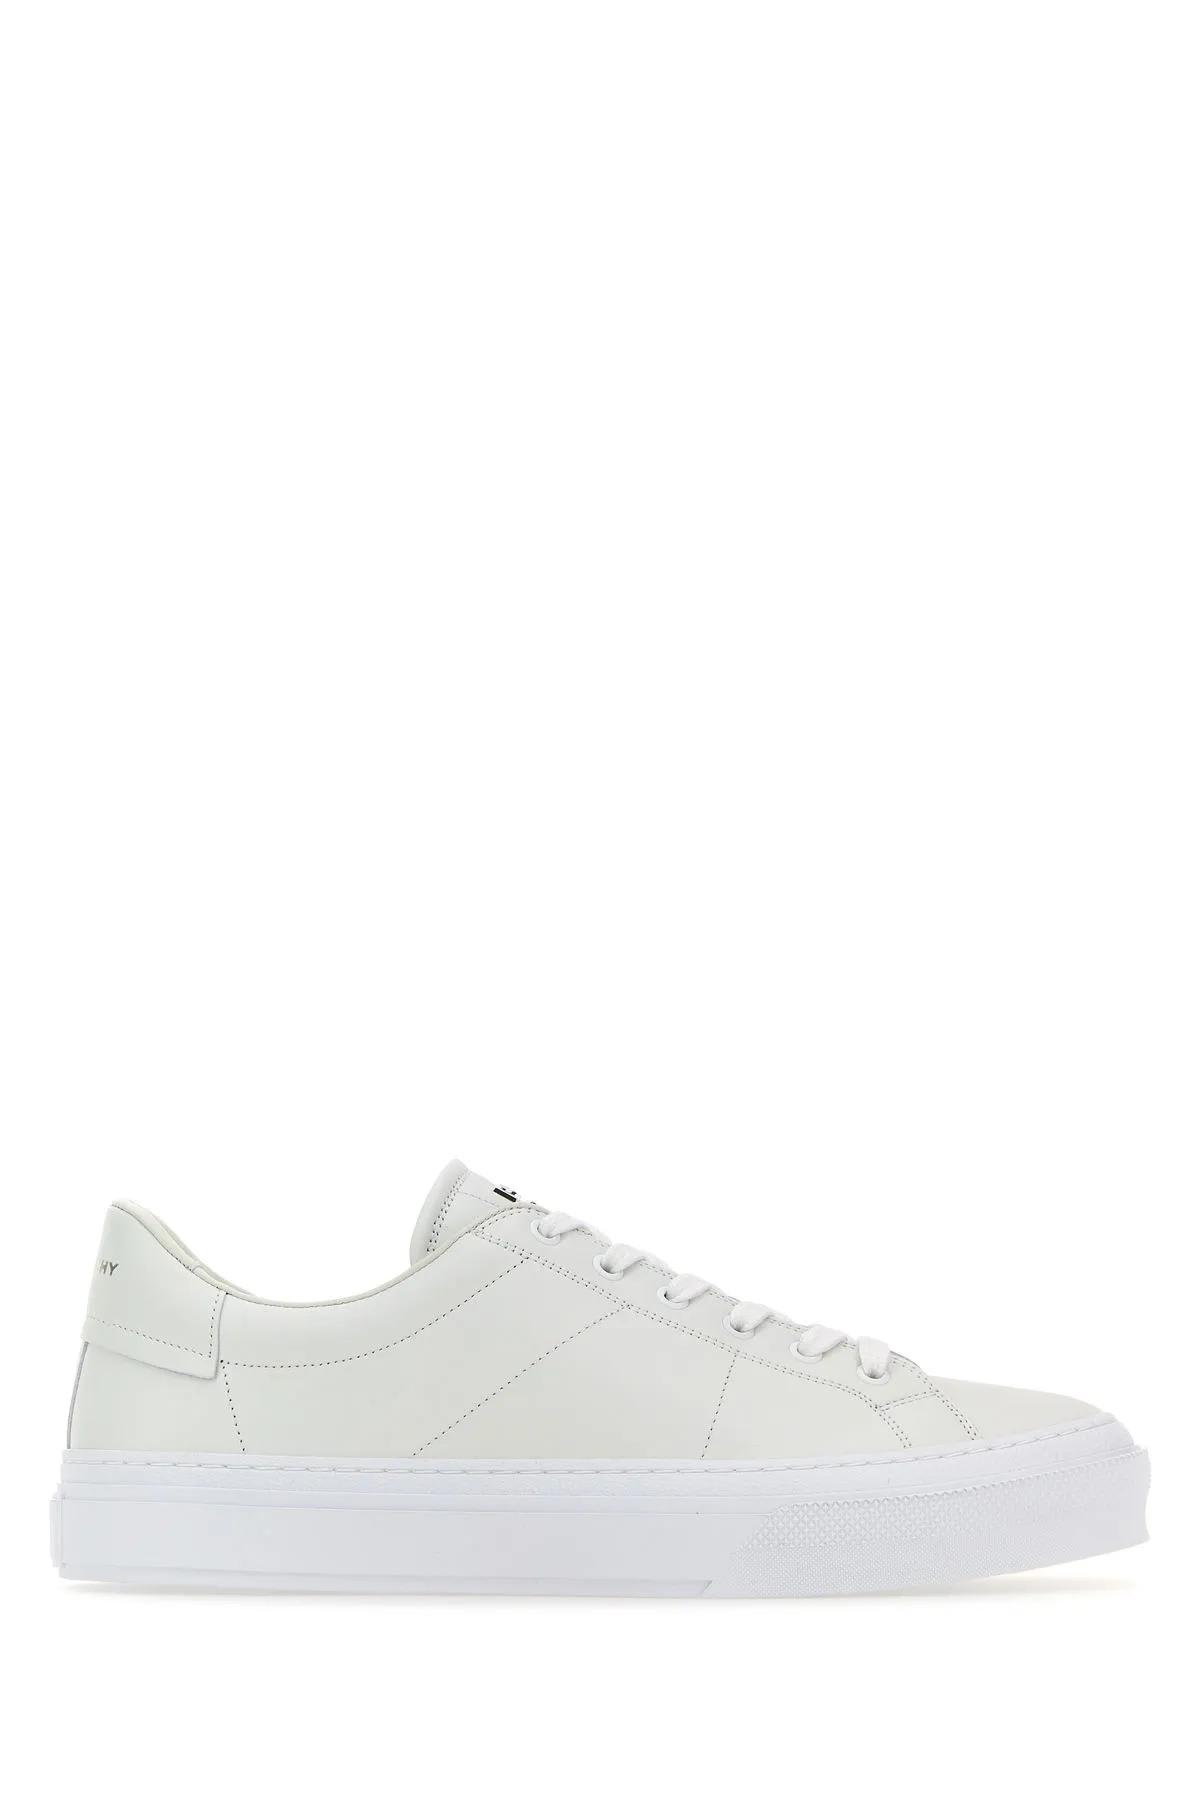 Shop Givenchy White Leather City Sport Sneakers